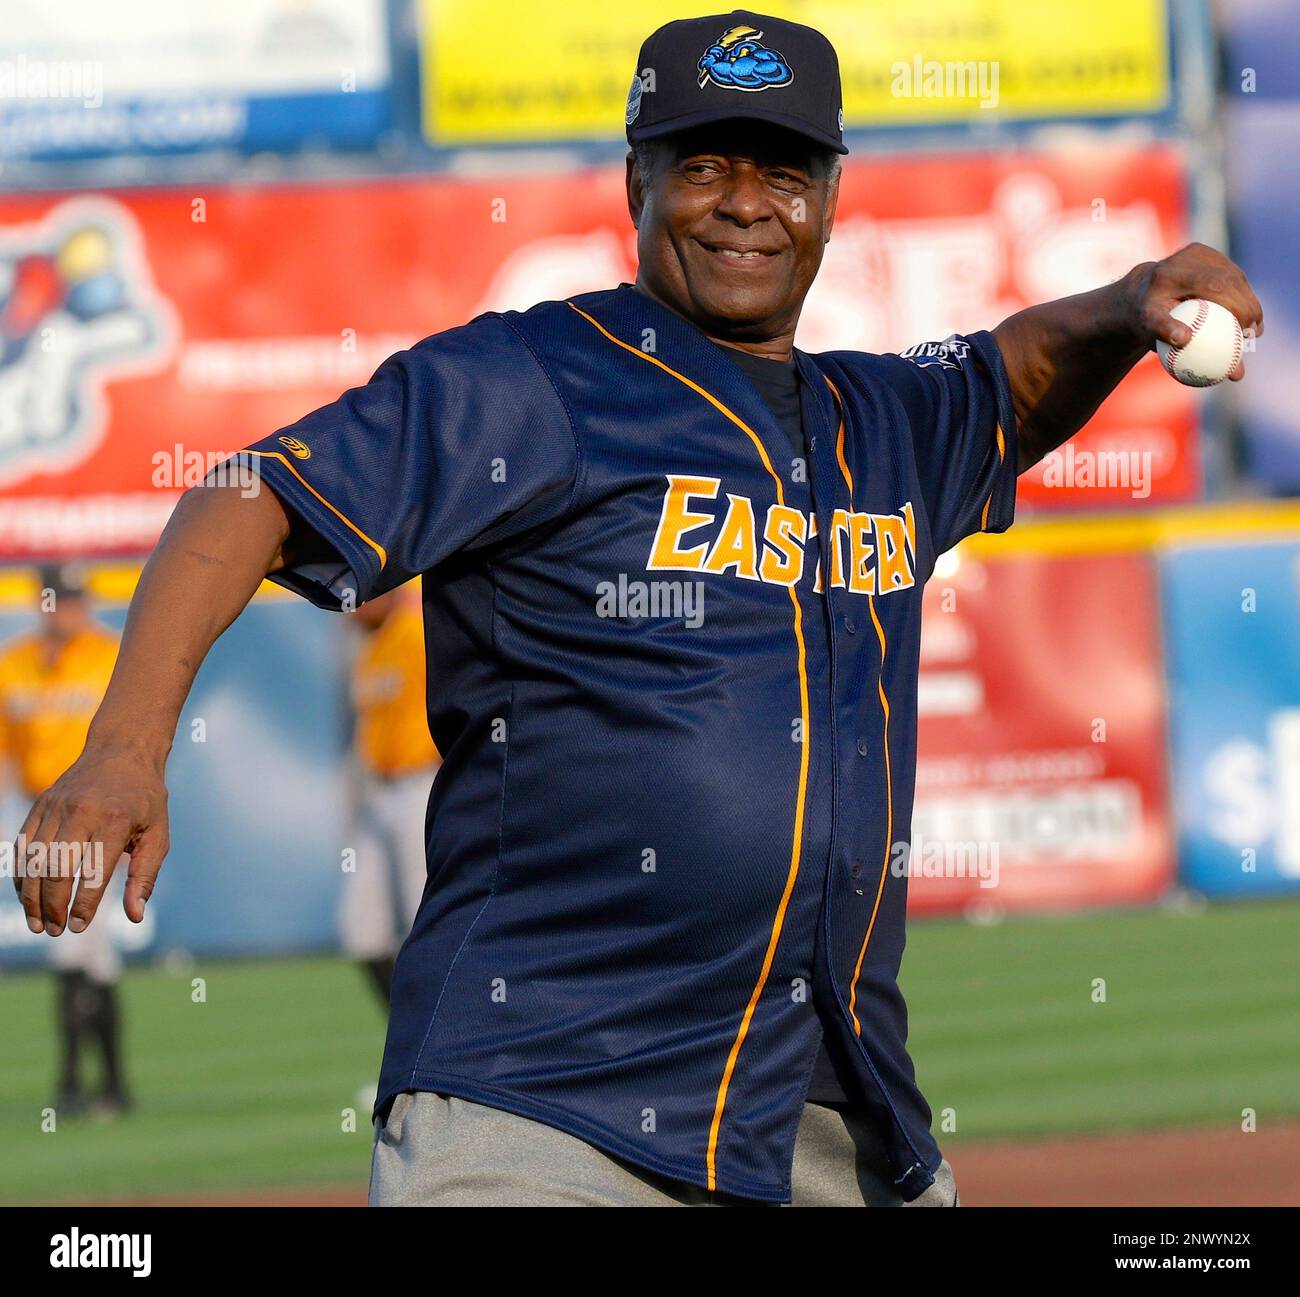 July 11, 2018 - Trenton, New Jersey, U.S - KEN GRIFFEY SR. was one of the  celebrities who threw out a first pitch before the Eastern League All-Star  Game hosted by the